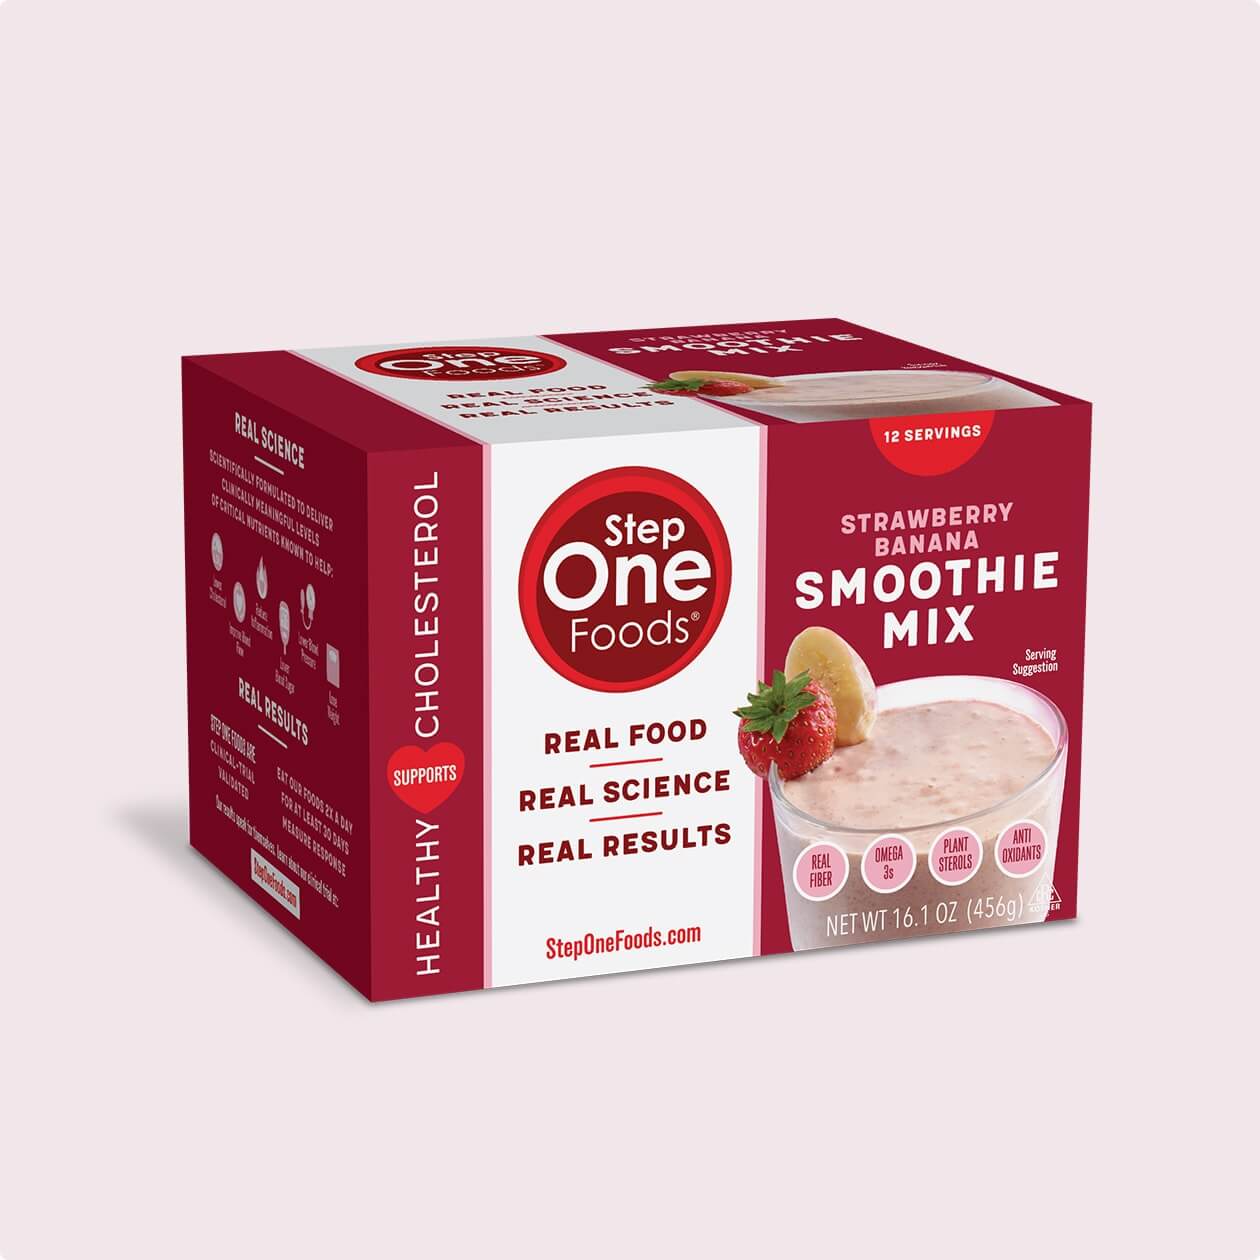 Concord Foods Strawberry Smoothie Mix